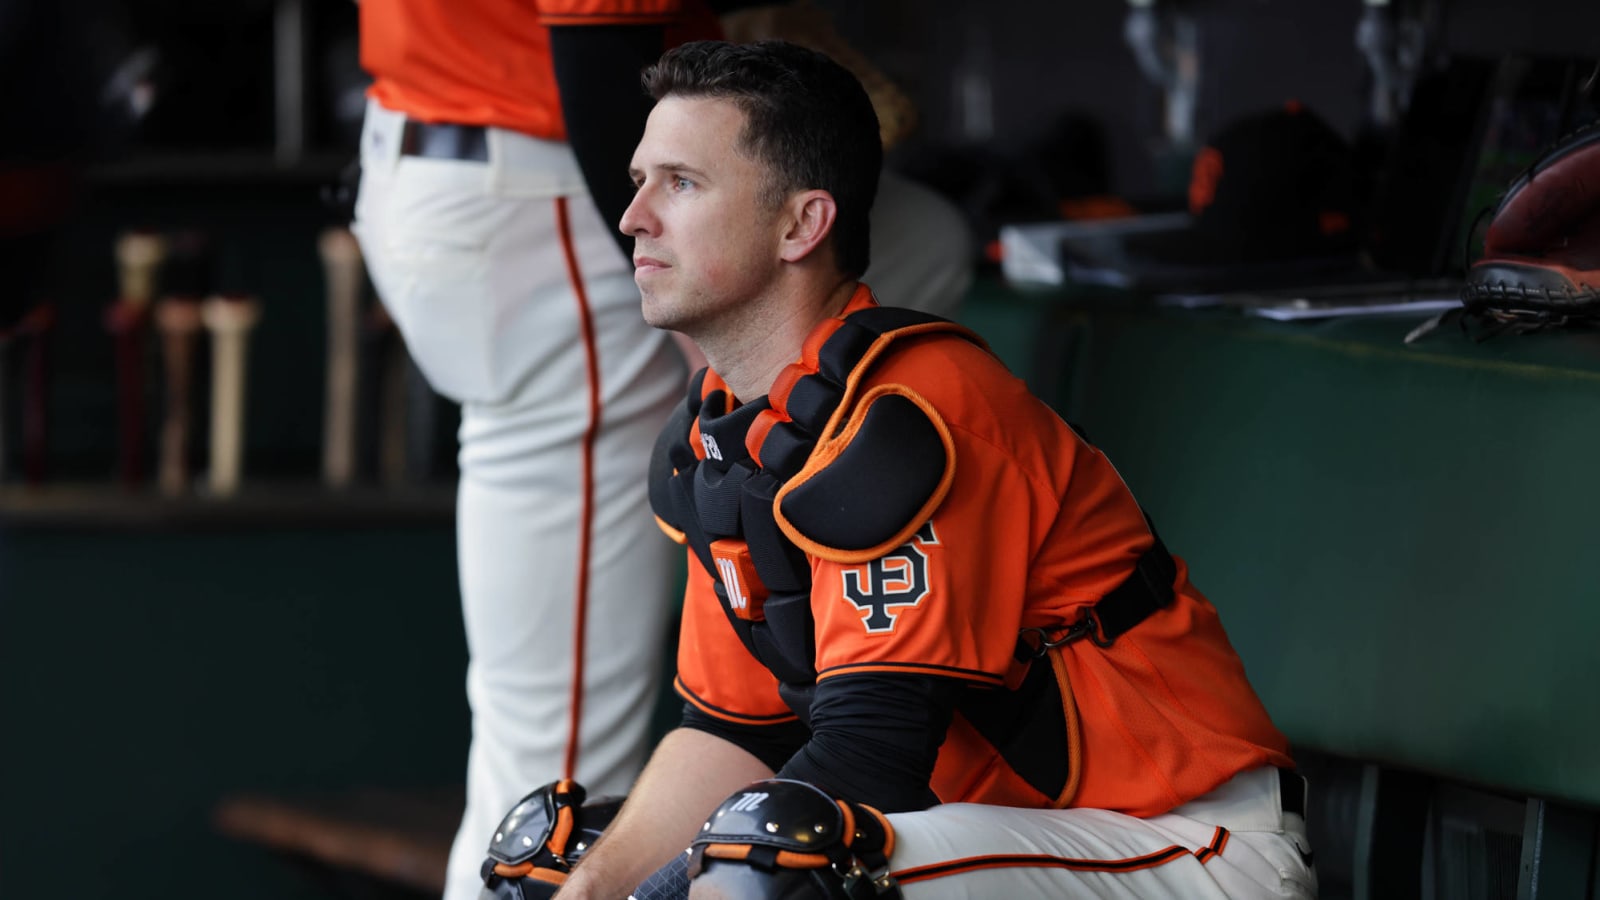 Giants All-Star catcher Buster Posey day-to-day with knee injury